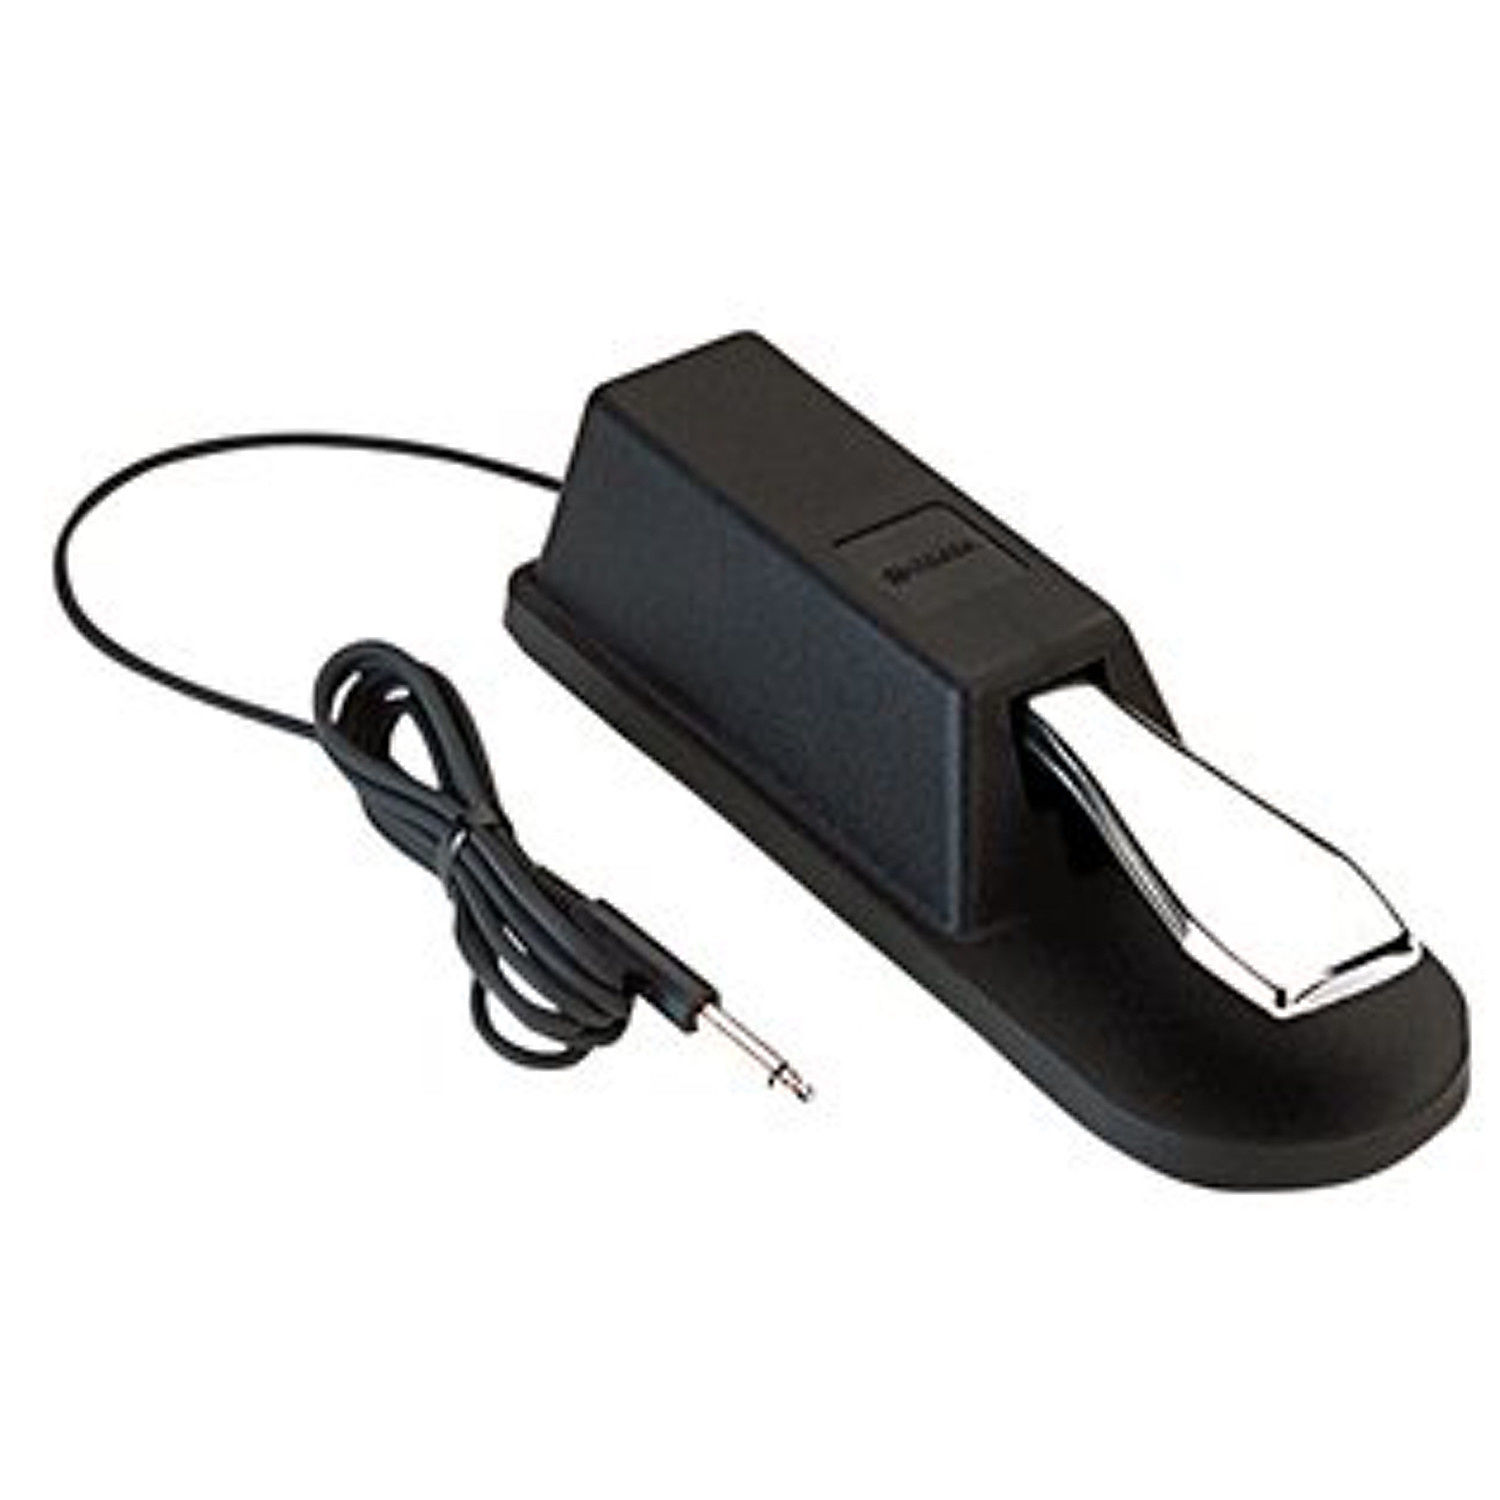 Yamaha FC5 Sustain Pedal For Keyboards and Pianos Online Store In India